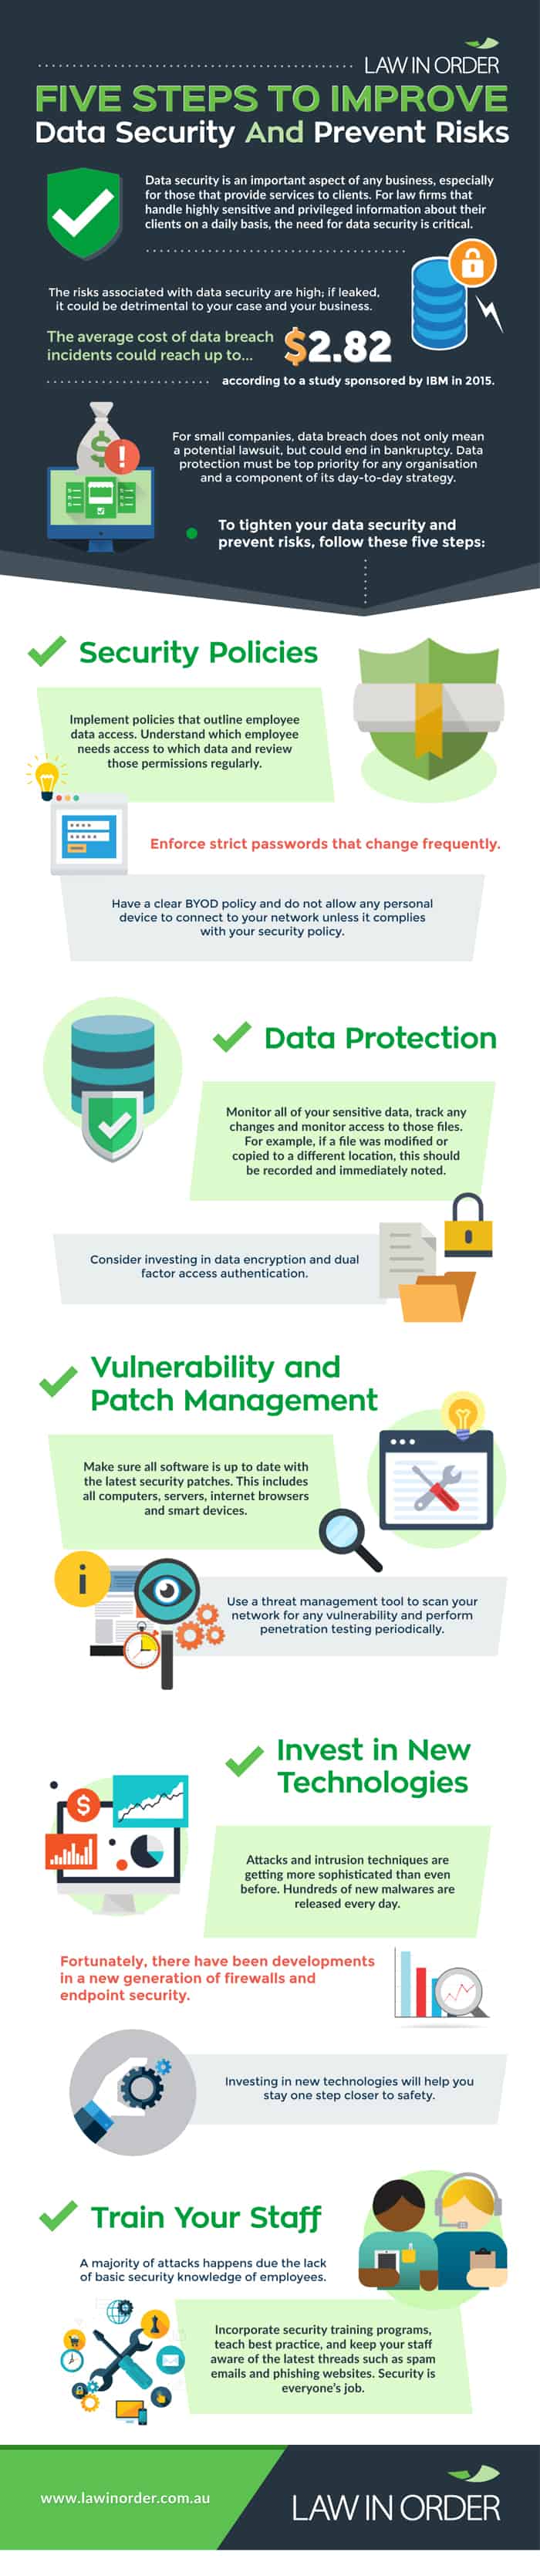 Five Steps To Improve Data Security and Prevent Risks infographic